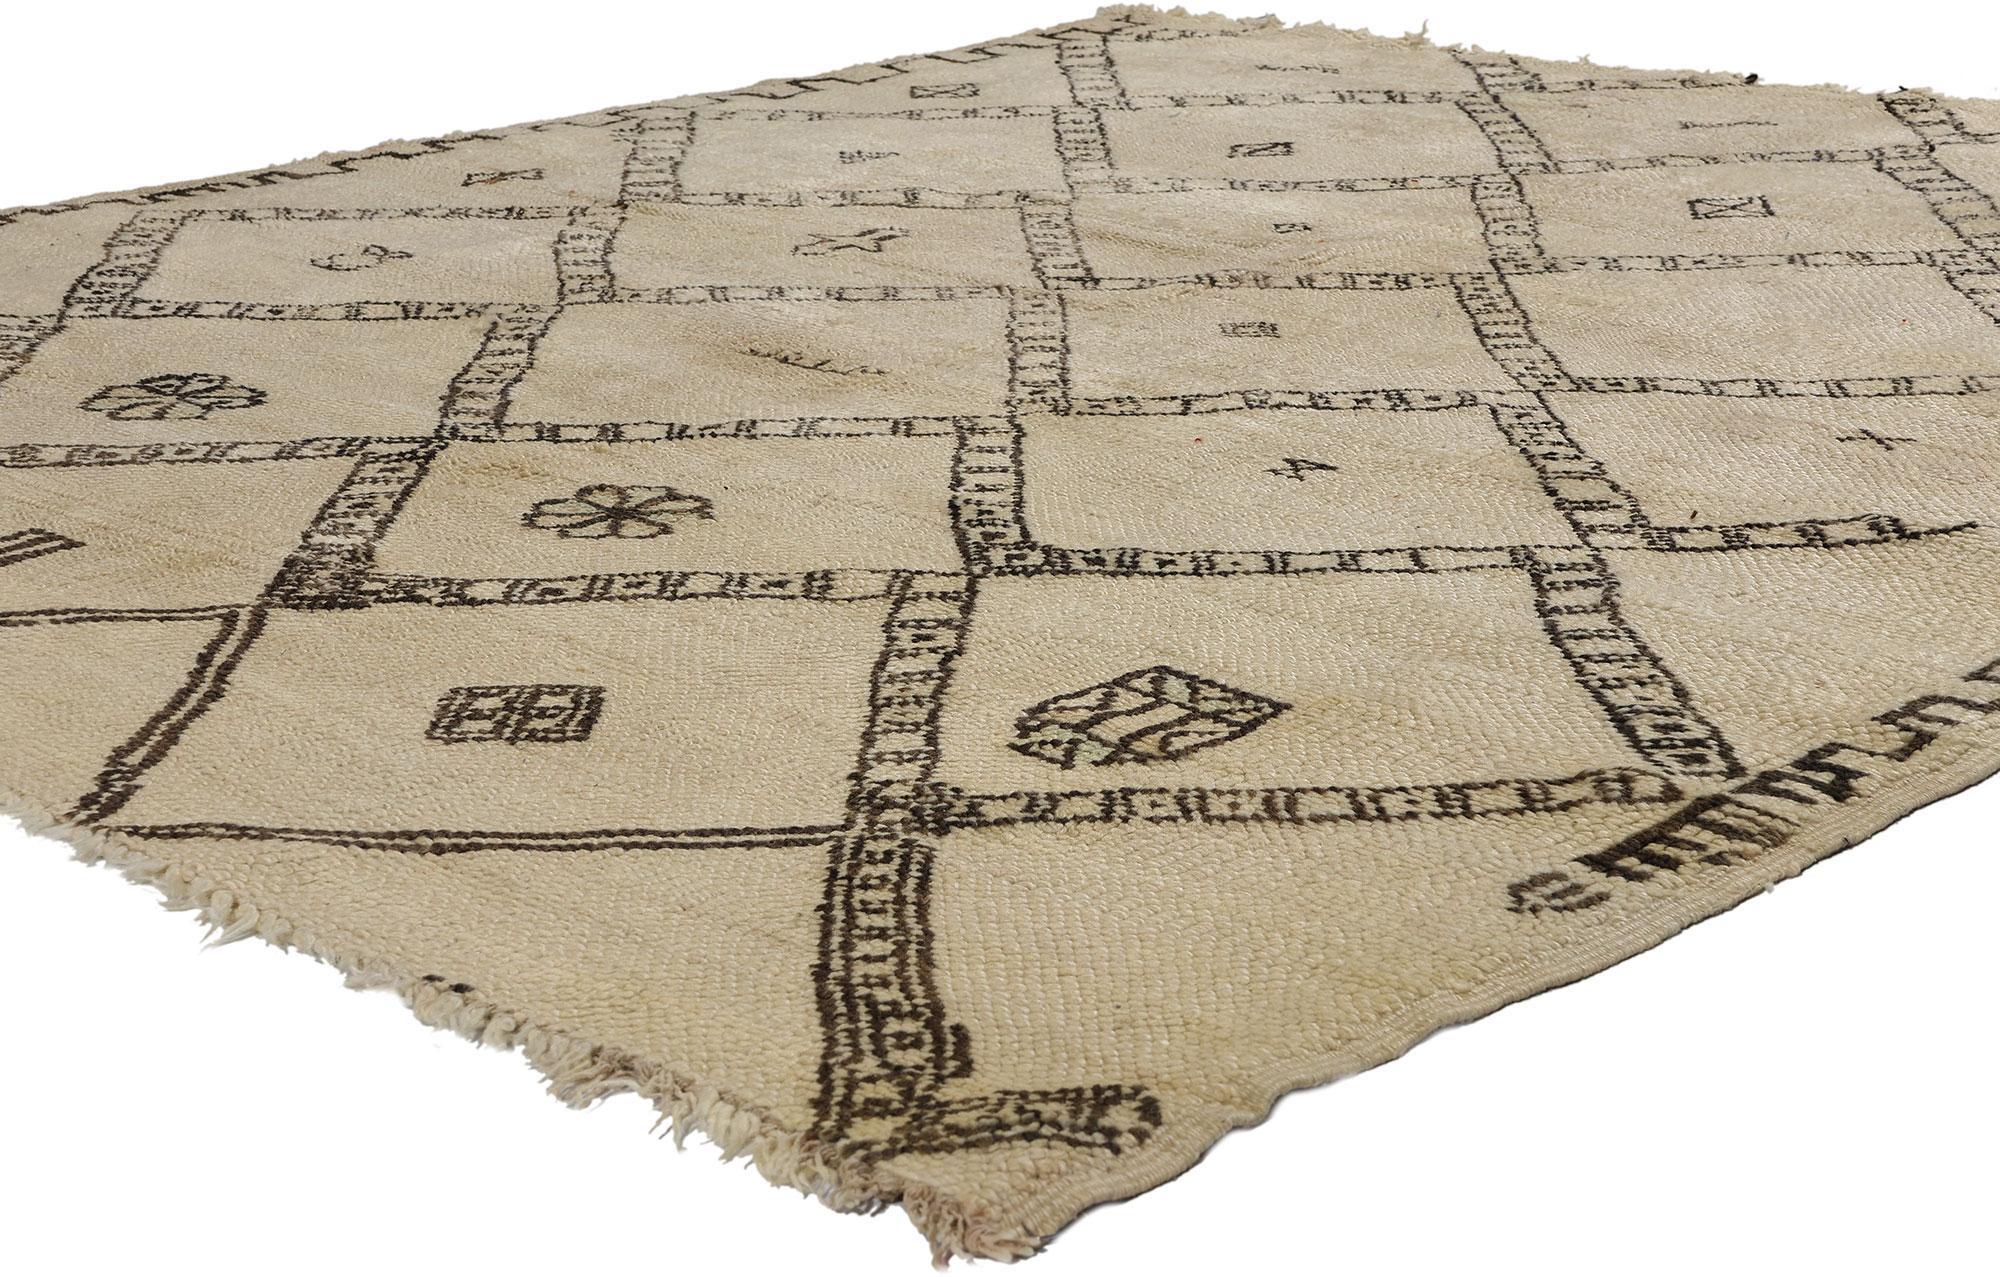 21765 Vintage Moroccan Beni Ourain Rug, 05'11 x 06'11. Originating from the esteemed Beni Ourain tribe in Morocco, these intricately crafted rugs honor tradition with unwavering attention to detail, utilizing untreated sheep's wool to infuse spaces